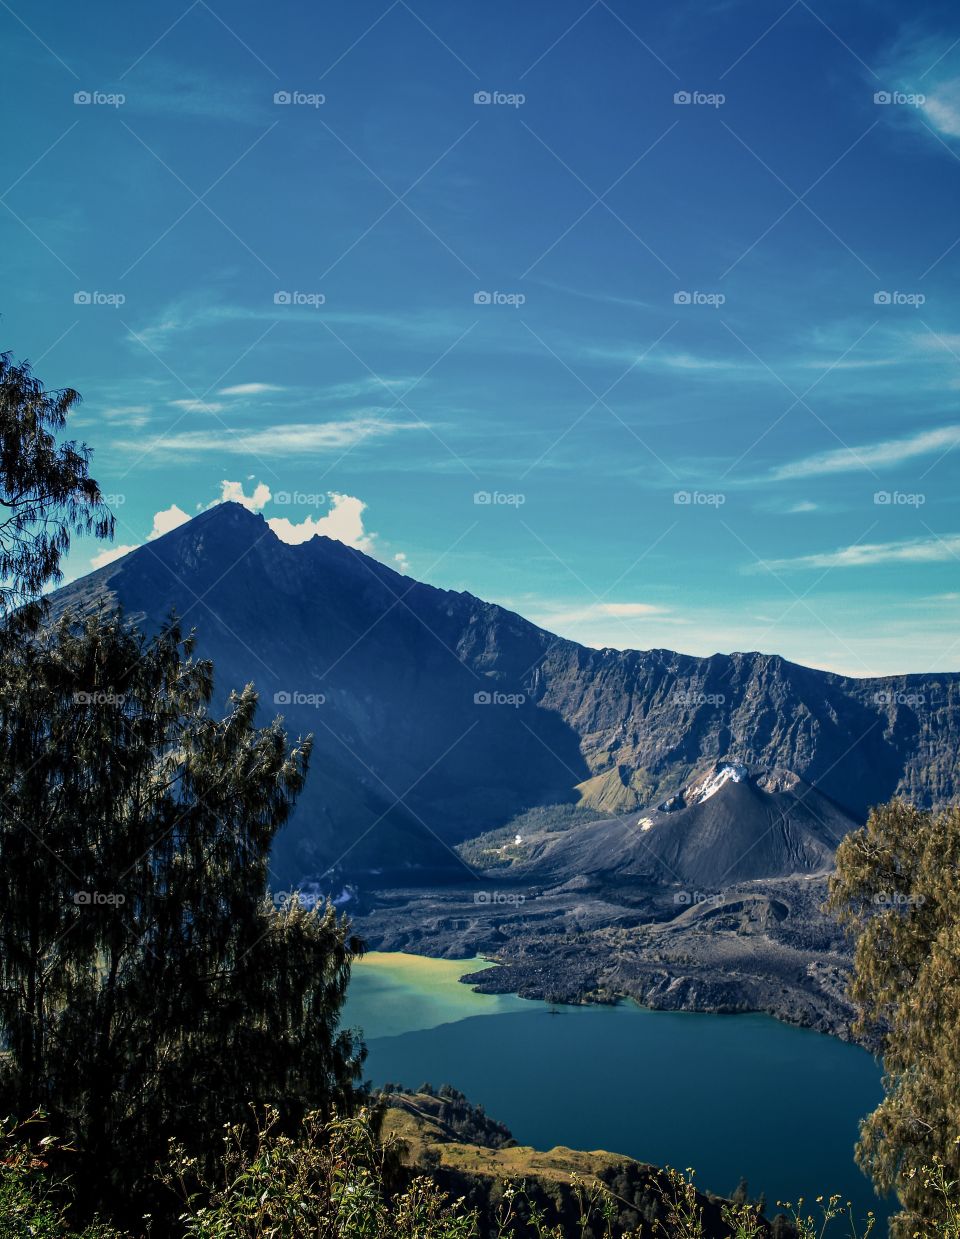 Mount Rinjani, a god's work that you must visit when coming to Lombok, Indonesia.